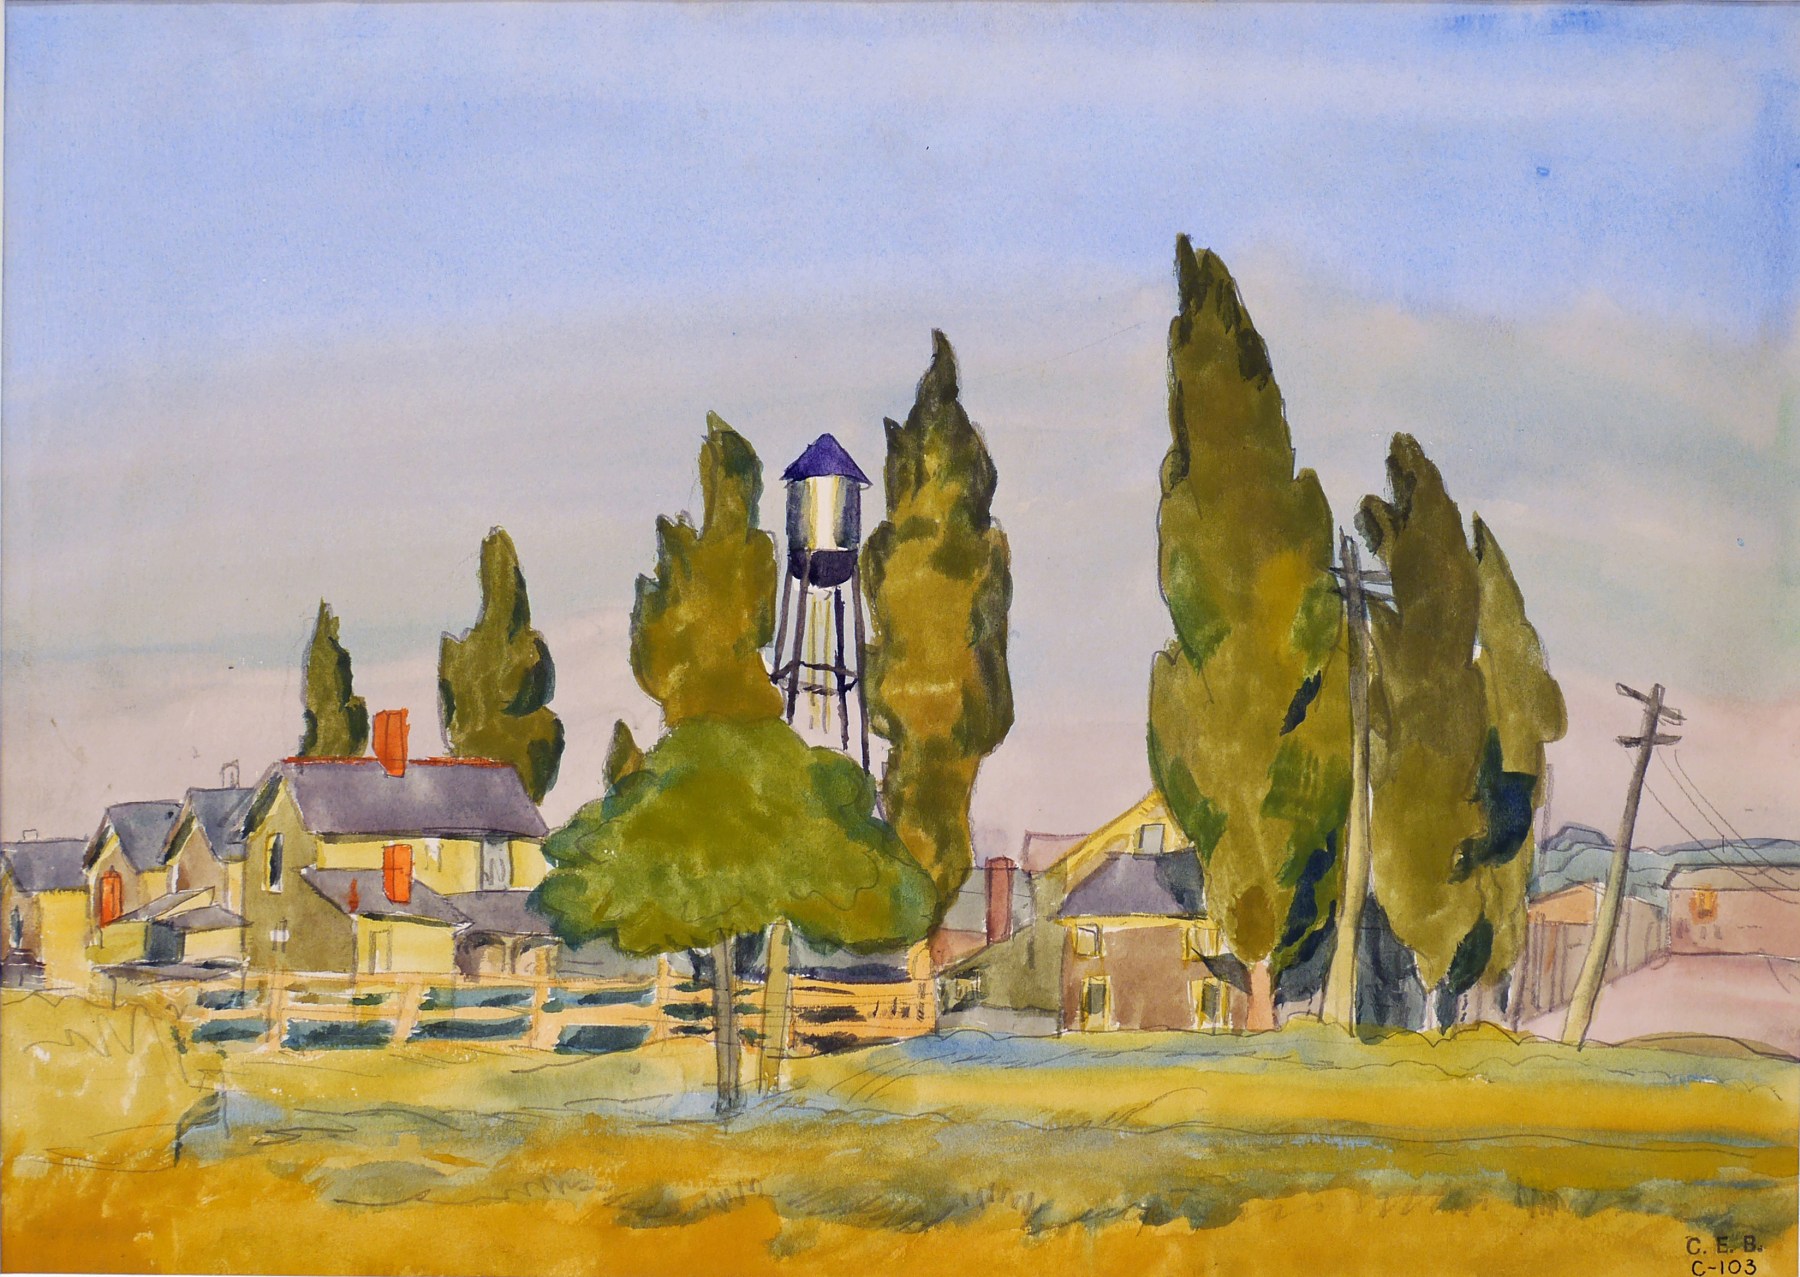 Water Tower and Village, c. 1916